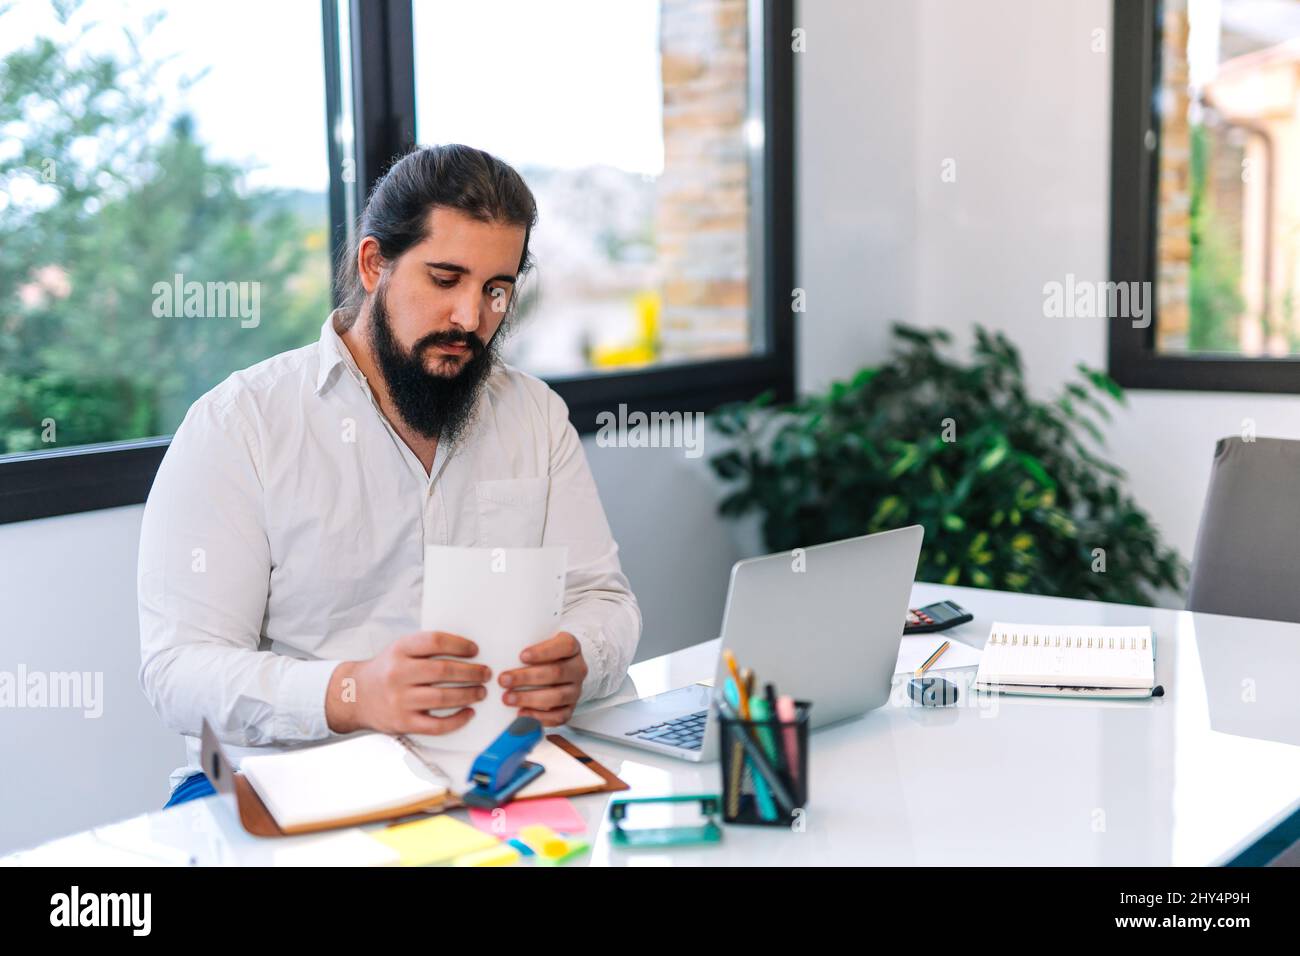 Young entrepreneur working on documents from home. Clear image of a young entrepreneur with a beard at work. Stock Photo